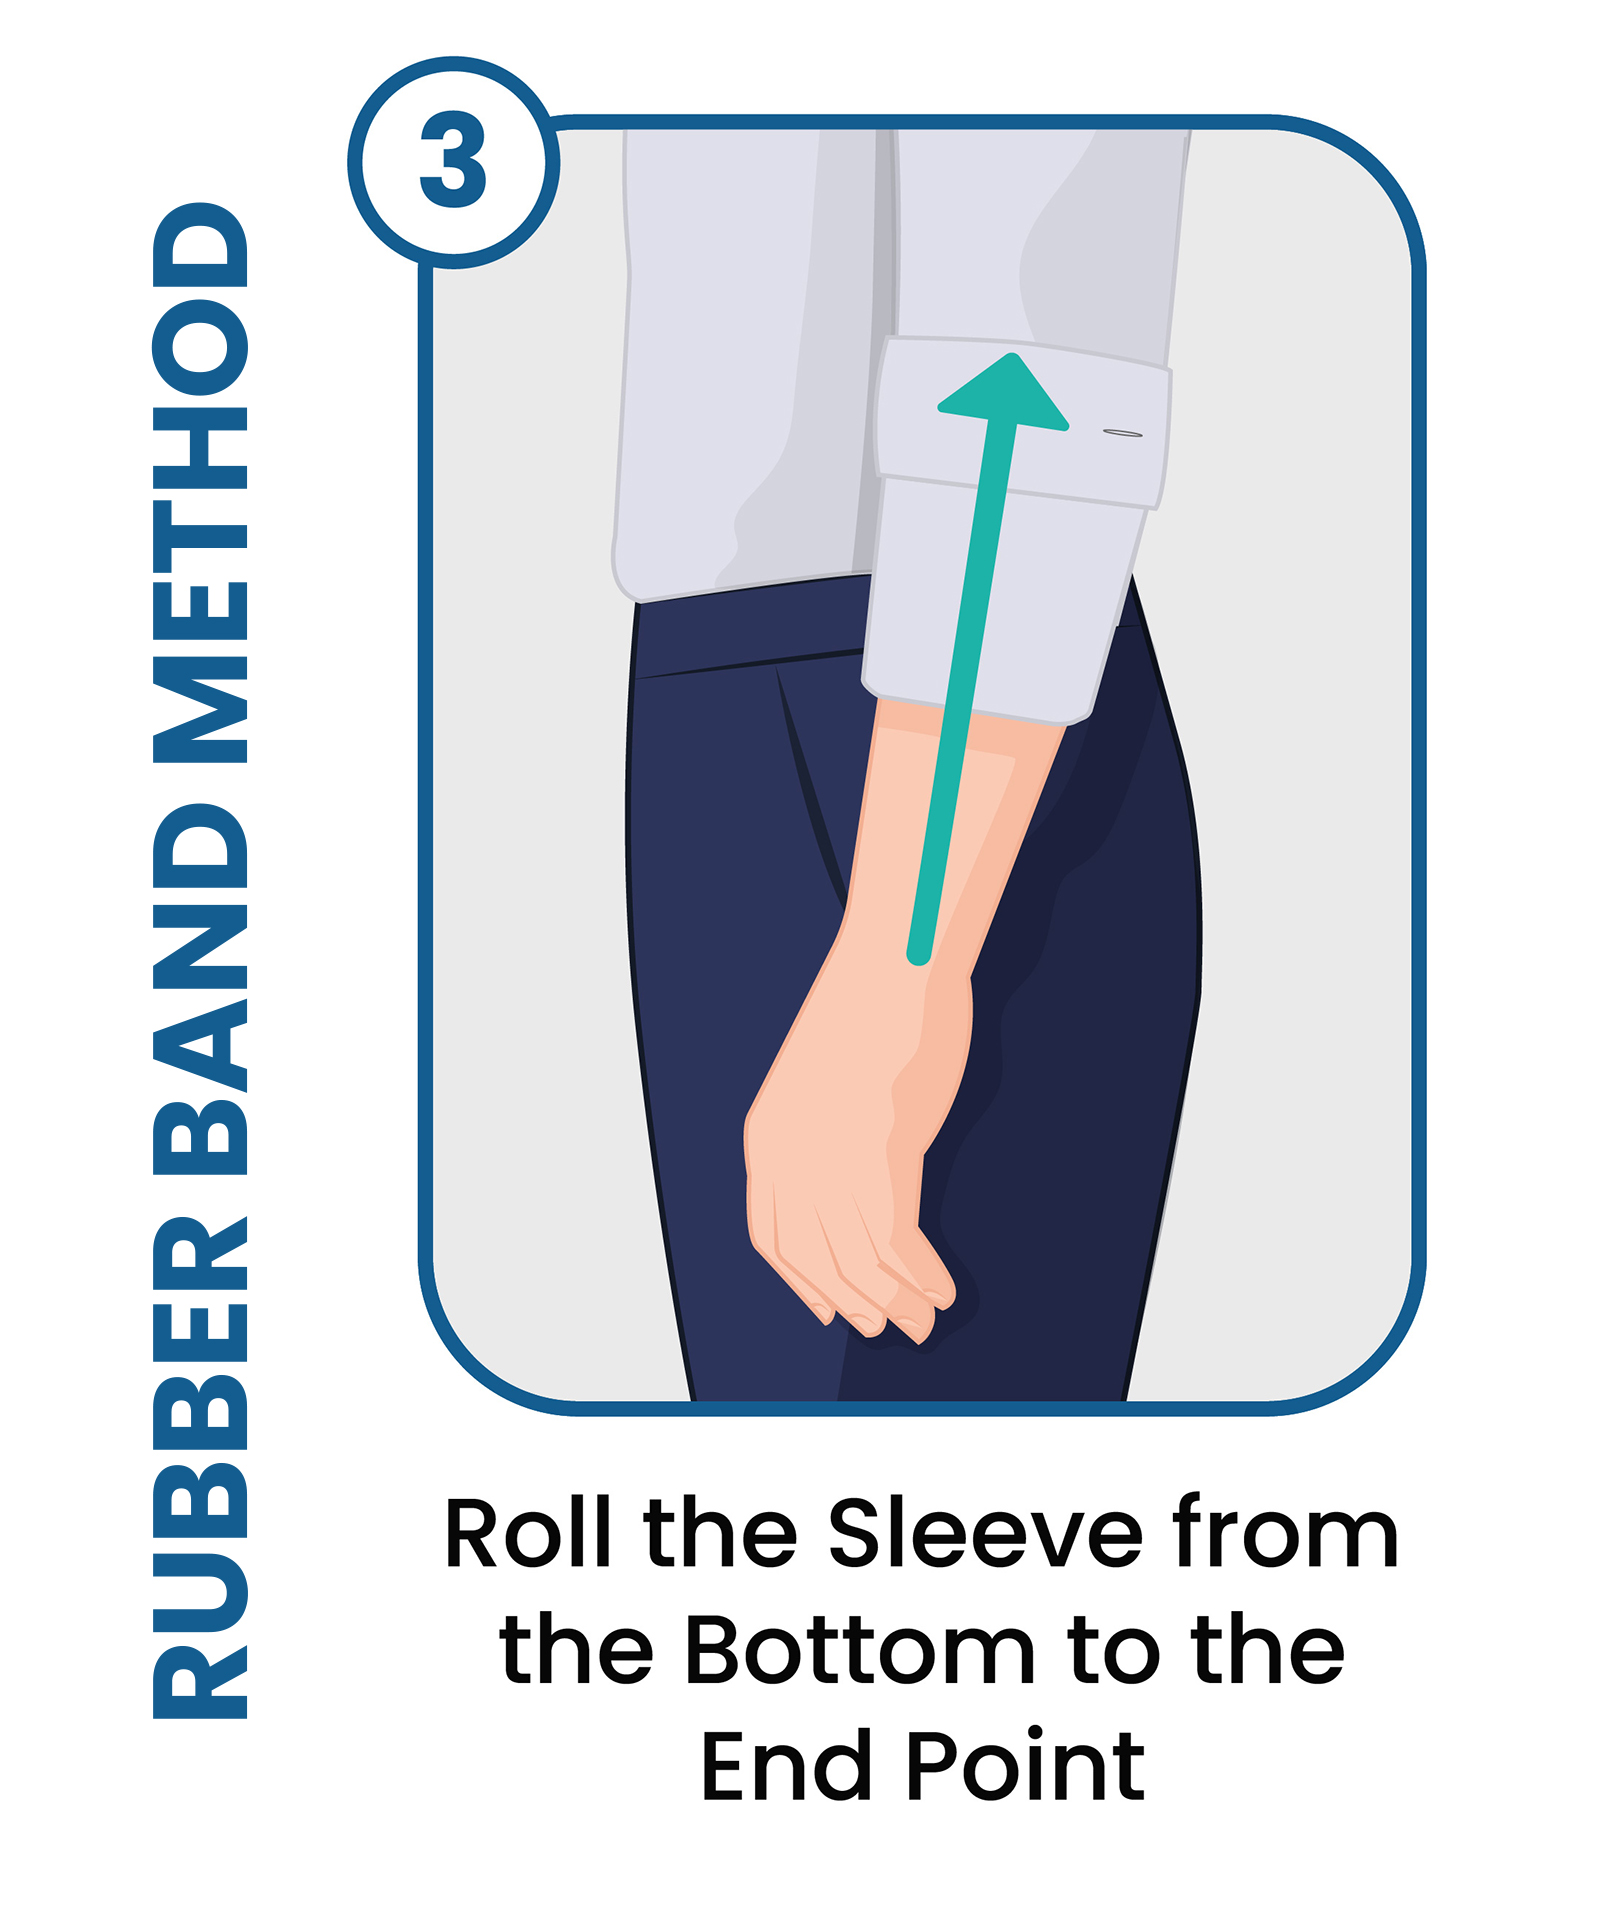 rubber band method: step 3 is to roll up the sleeves